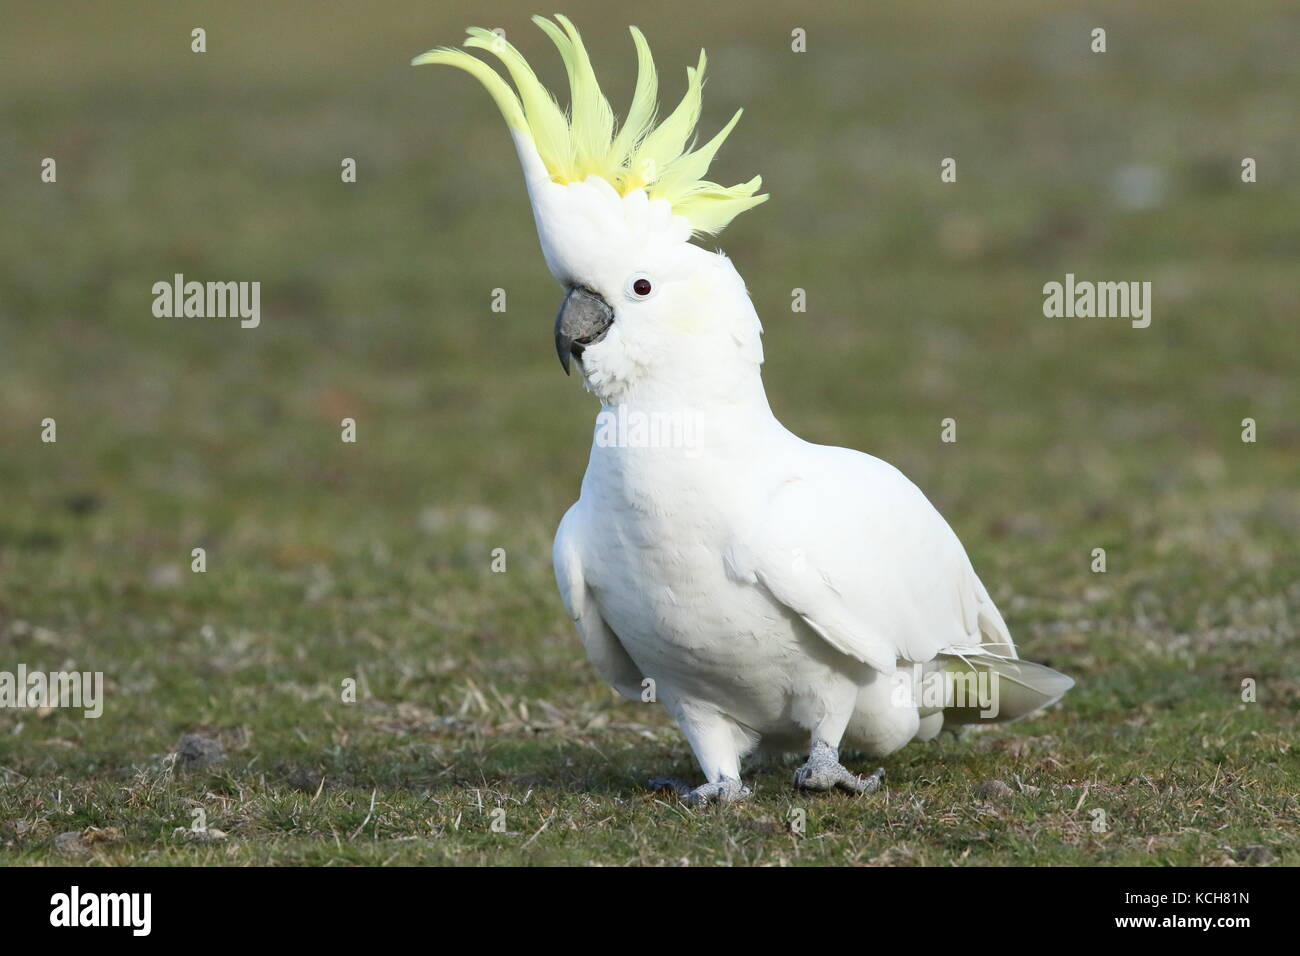 sulphur crested cockatoo on ground with crest raised Stock Photo